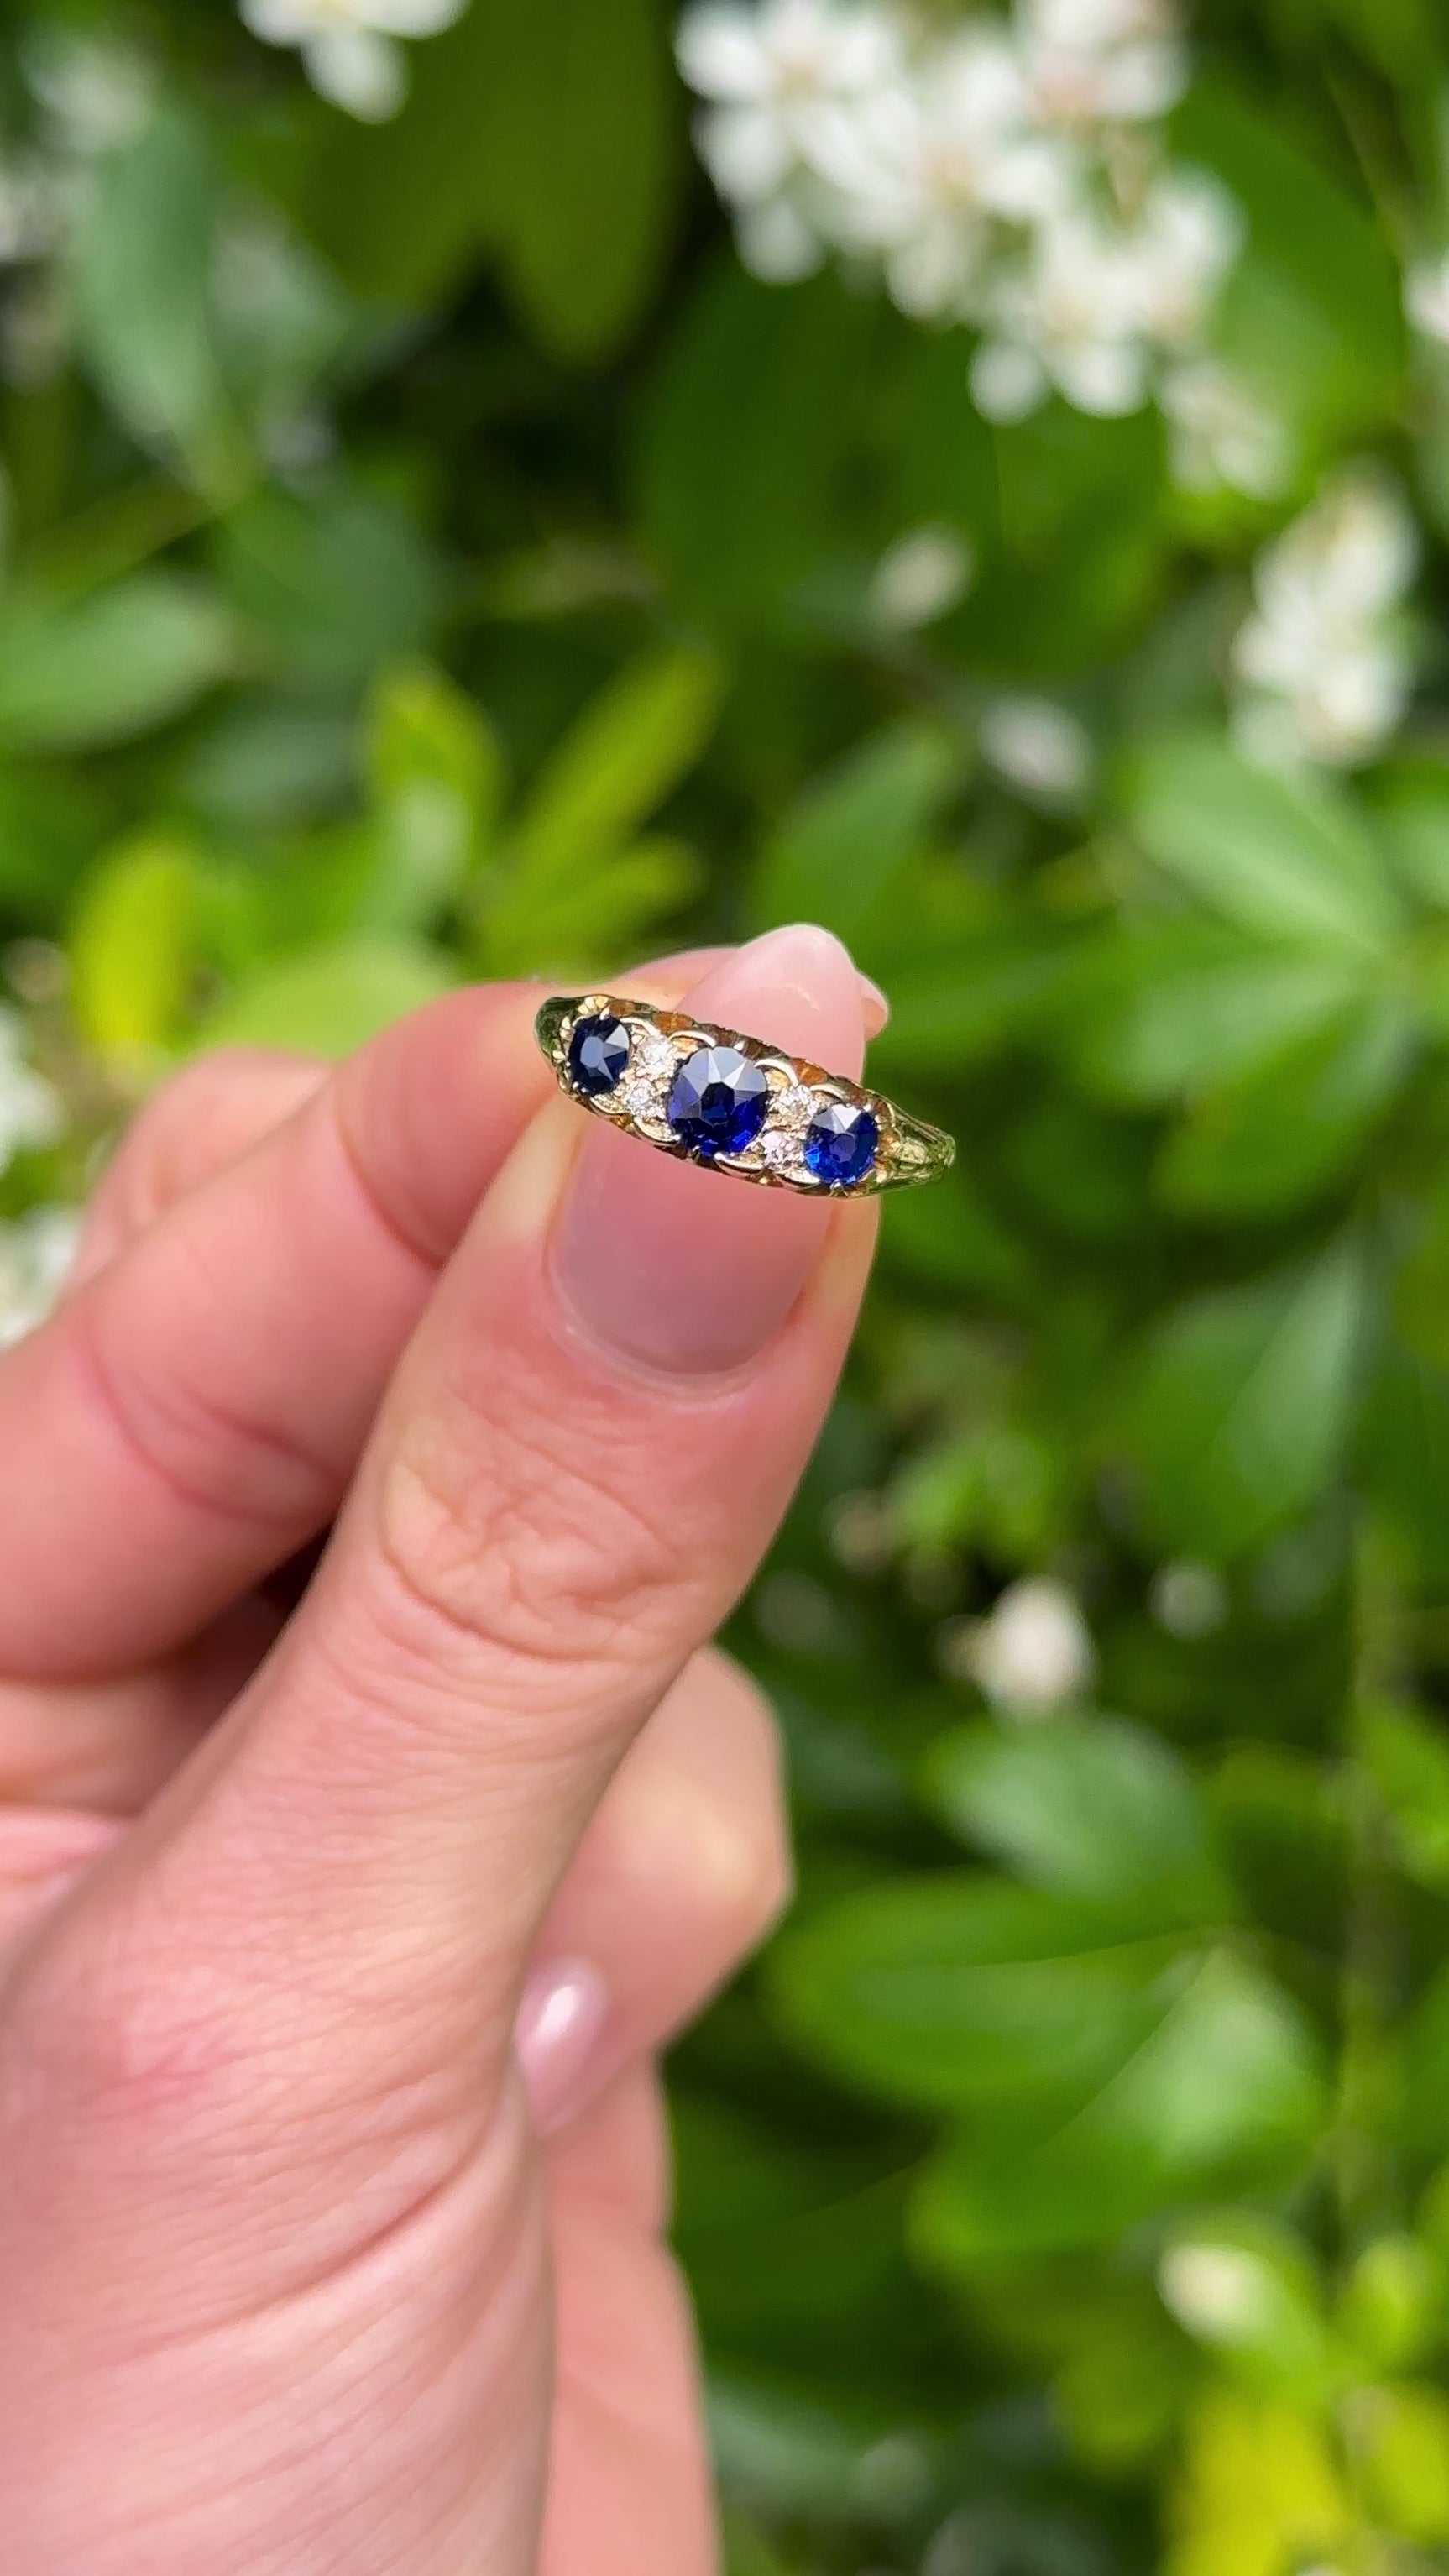 Antique, Victorian Sapphire and Diamond Three-Stone Ring, 18ct Yellow Gold held in fingers.